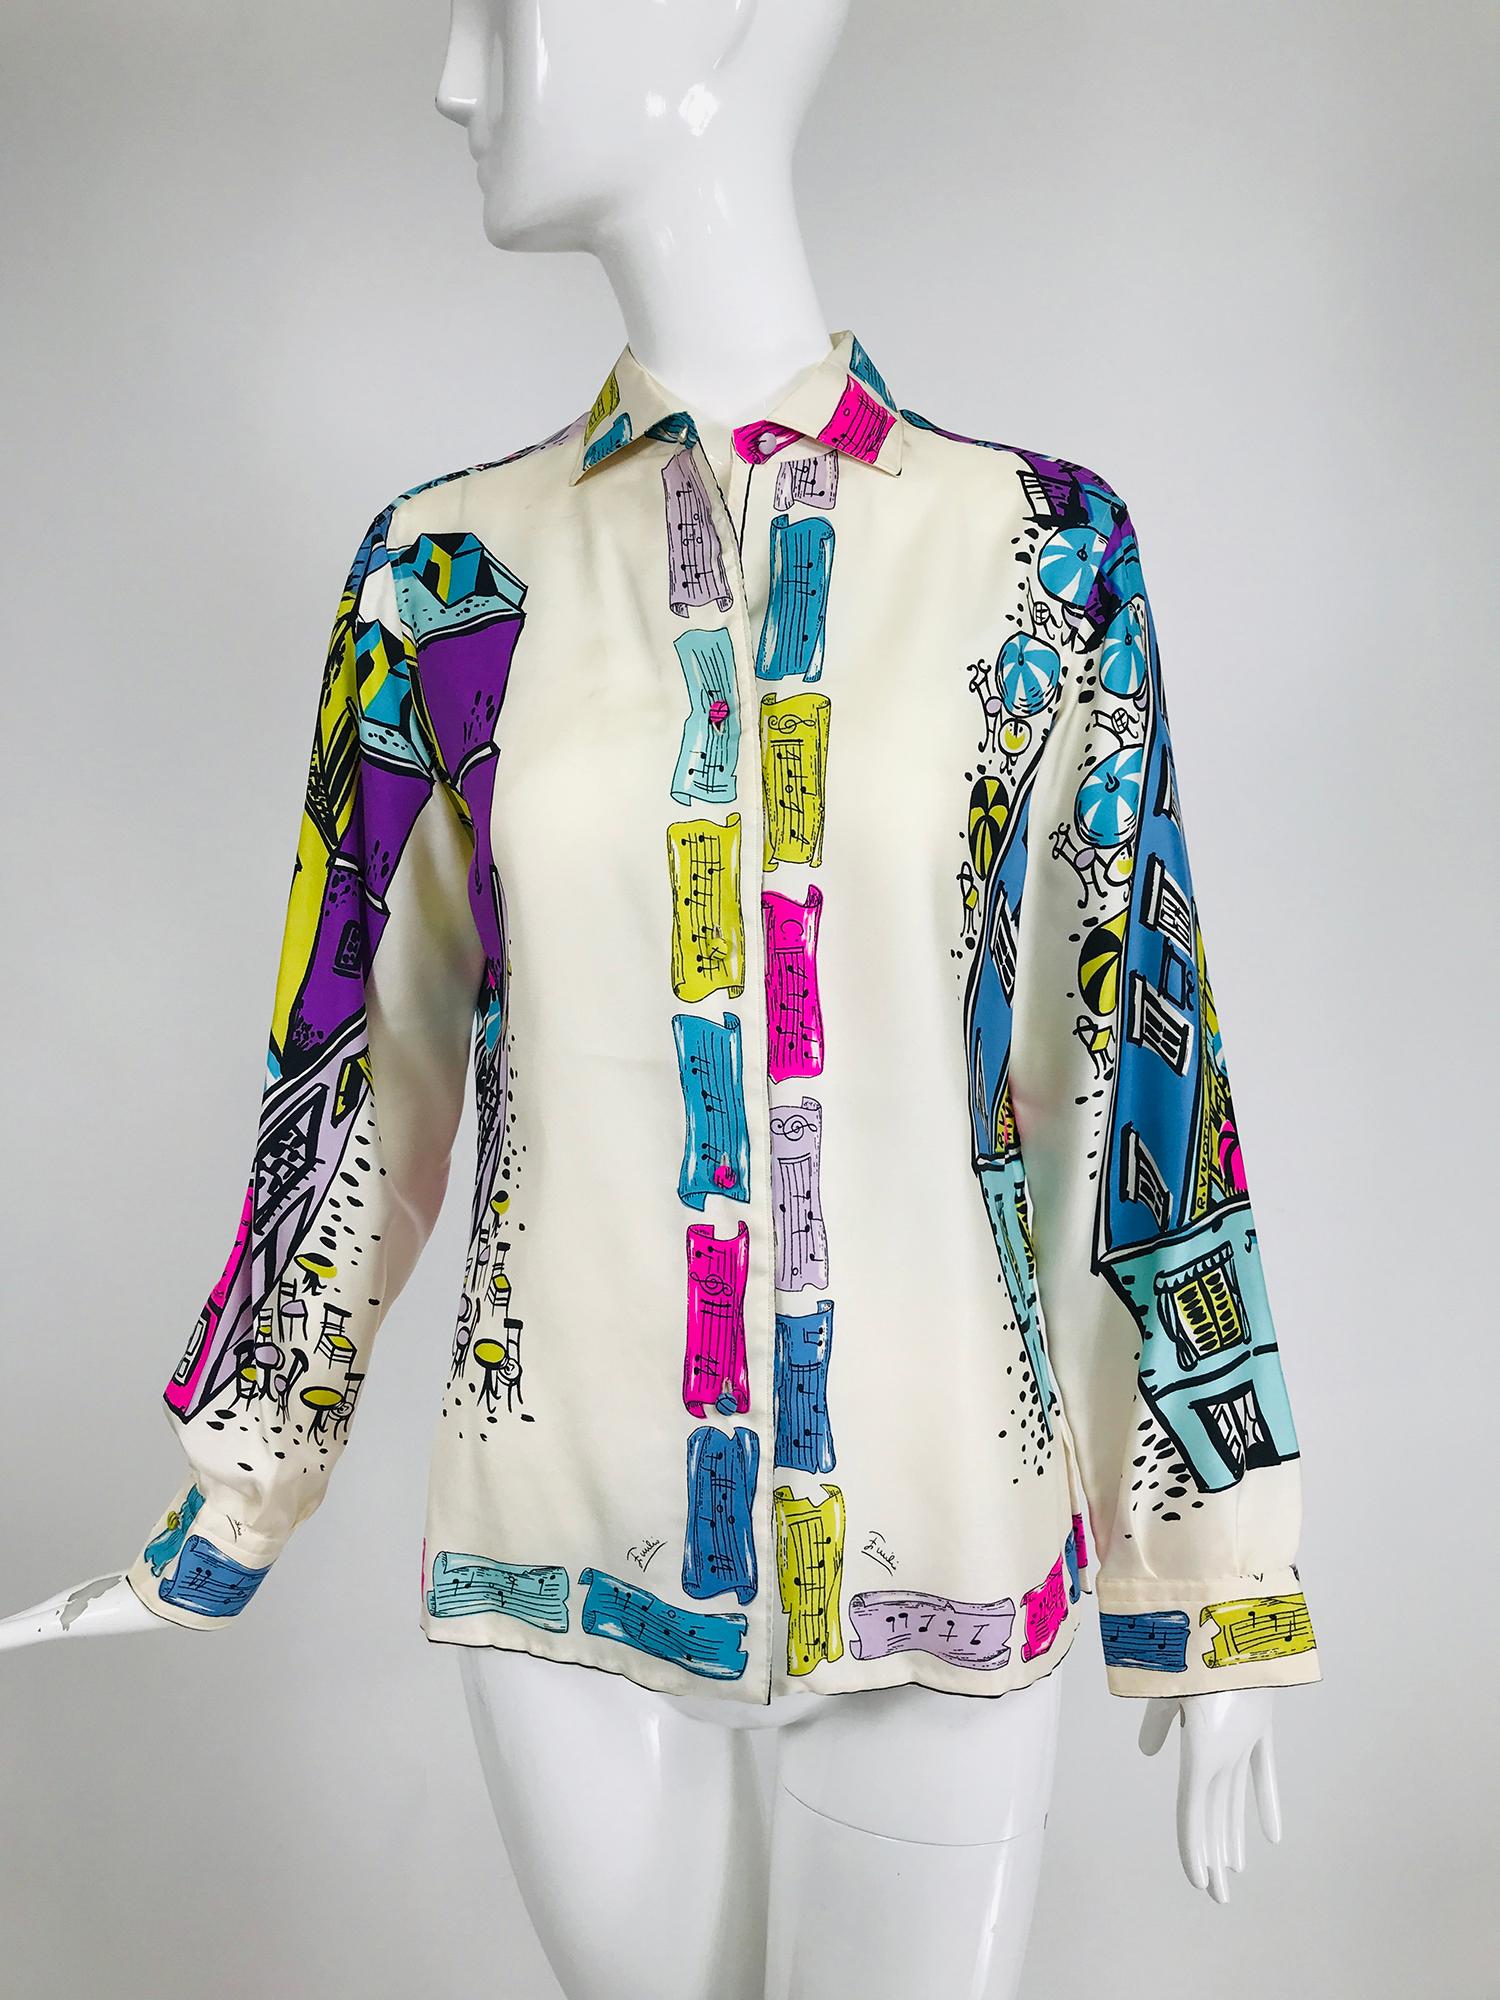 Emilio Pucci rare silk twill print Italian cafe blouse 1960s, made expressly A.S. Coopers, Bermuda. A fabulous print in vivid colours, the front facings are musical notes, the sleeves and back are cafe nightlife, shops including Pucci and striped